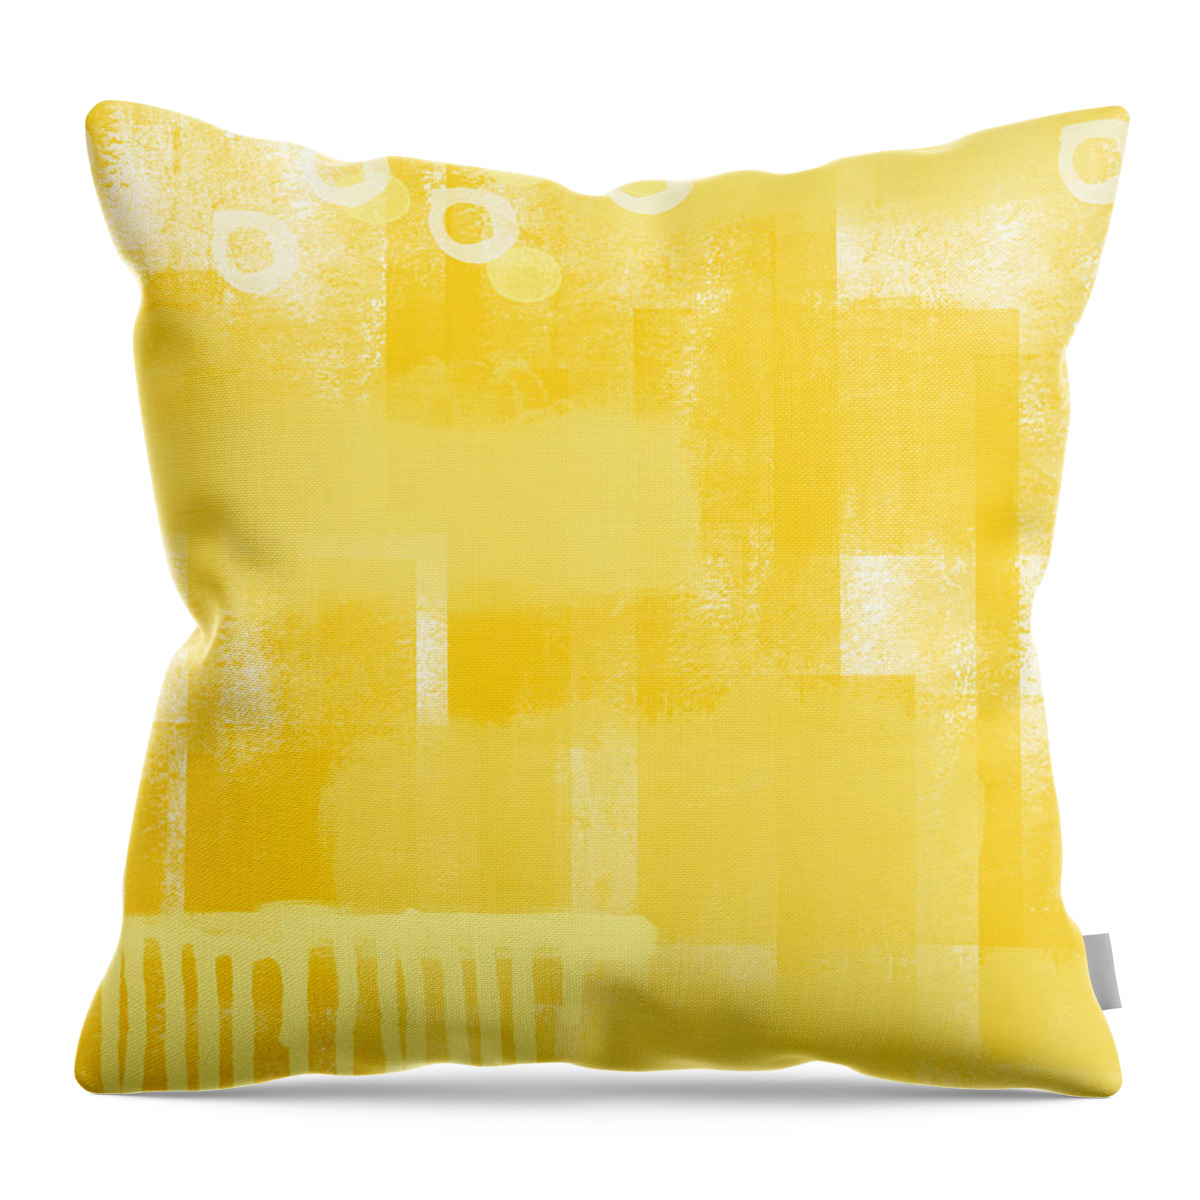 Sunshine Throw Pillow featuring the painting Sunshine- abstract art by Linda Woods